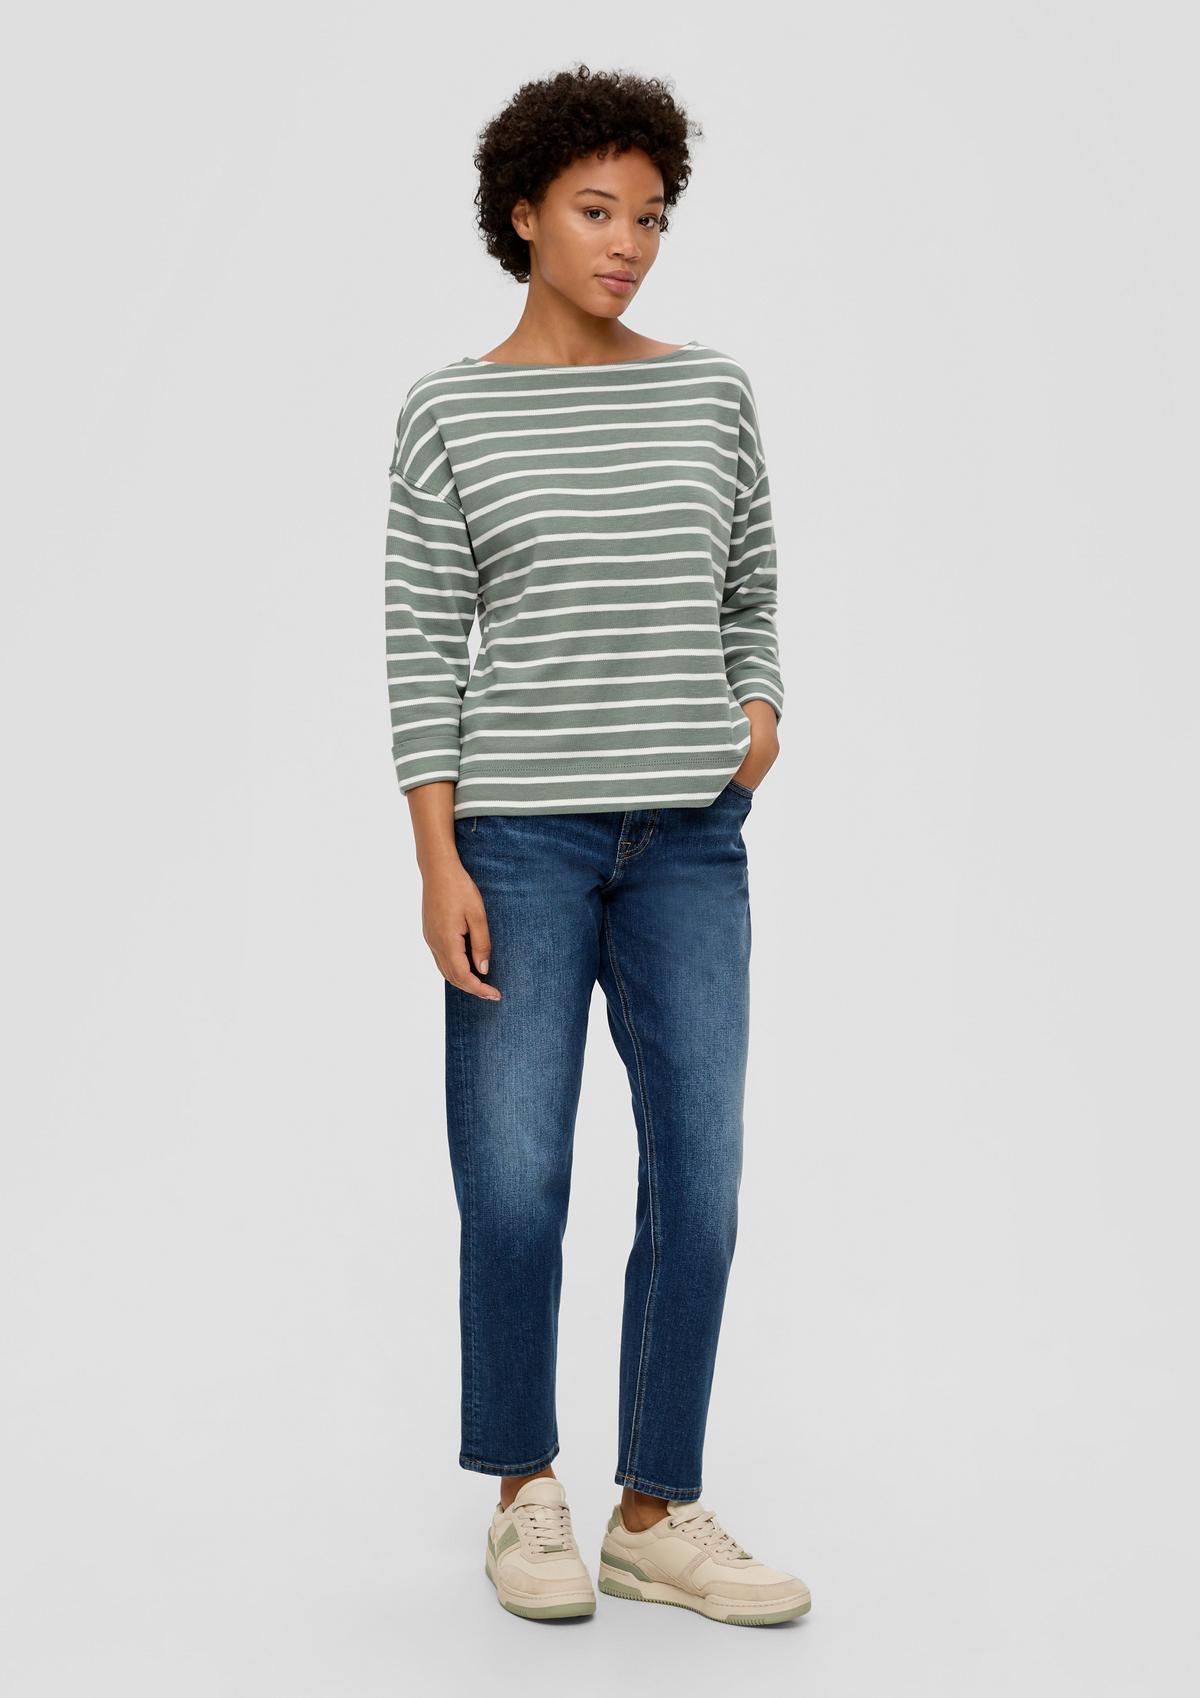 s.Oliver Long sleeve top made of pure cotton